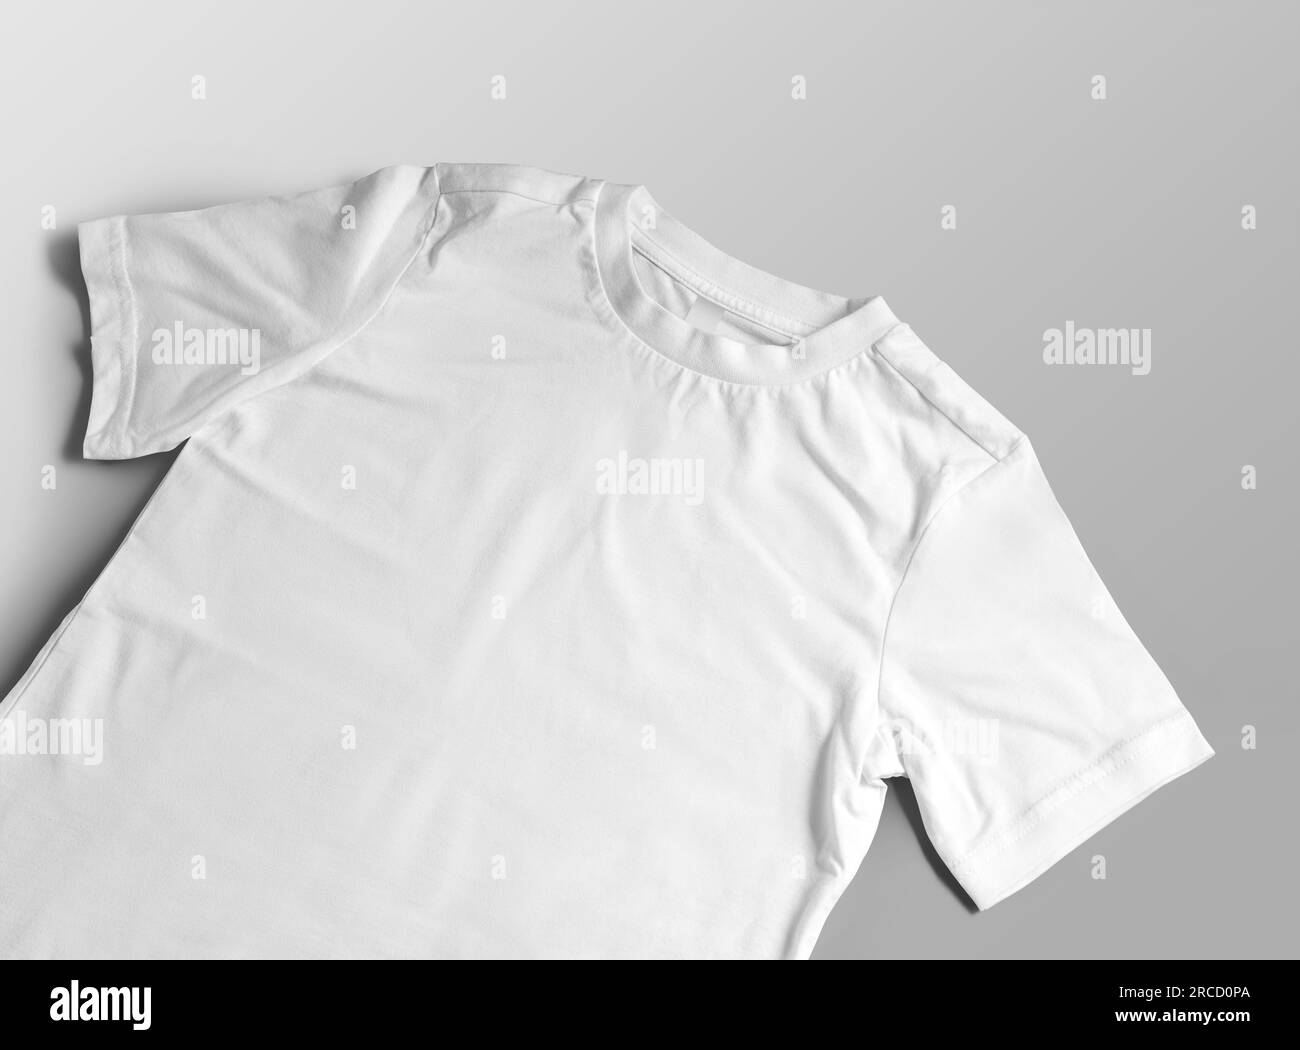 Mockup of white children's t-shirt close-up, wear with a round neck, label, close-up, diagonal presentation, front view. Product photography for desig Stock Photo